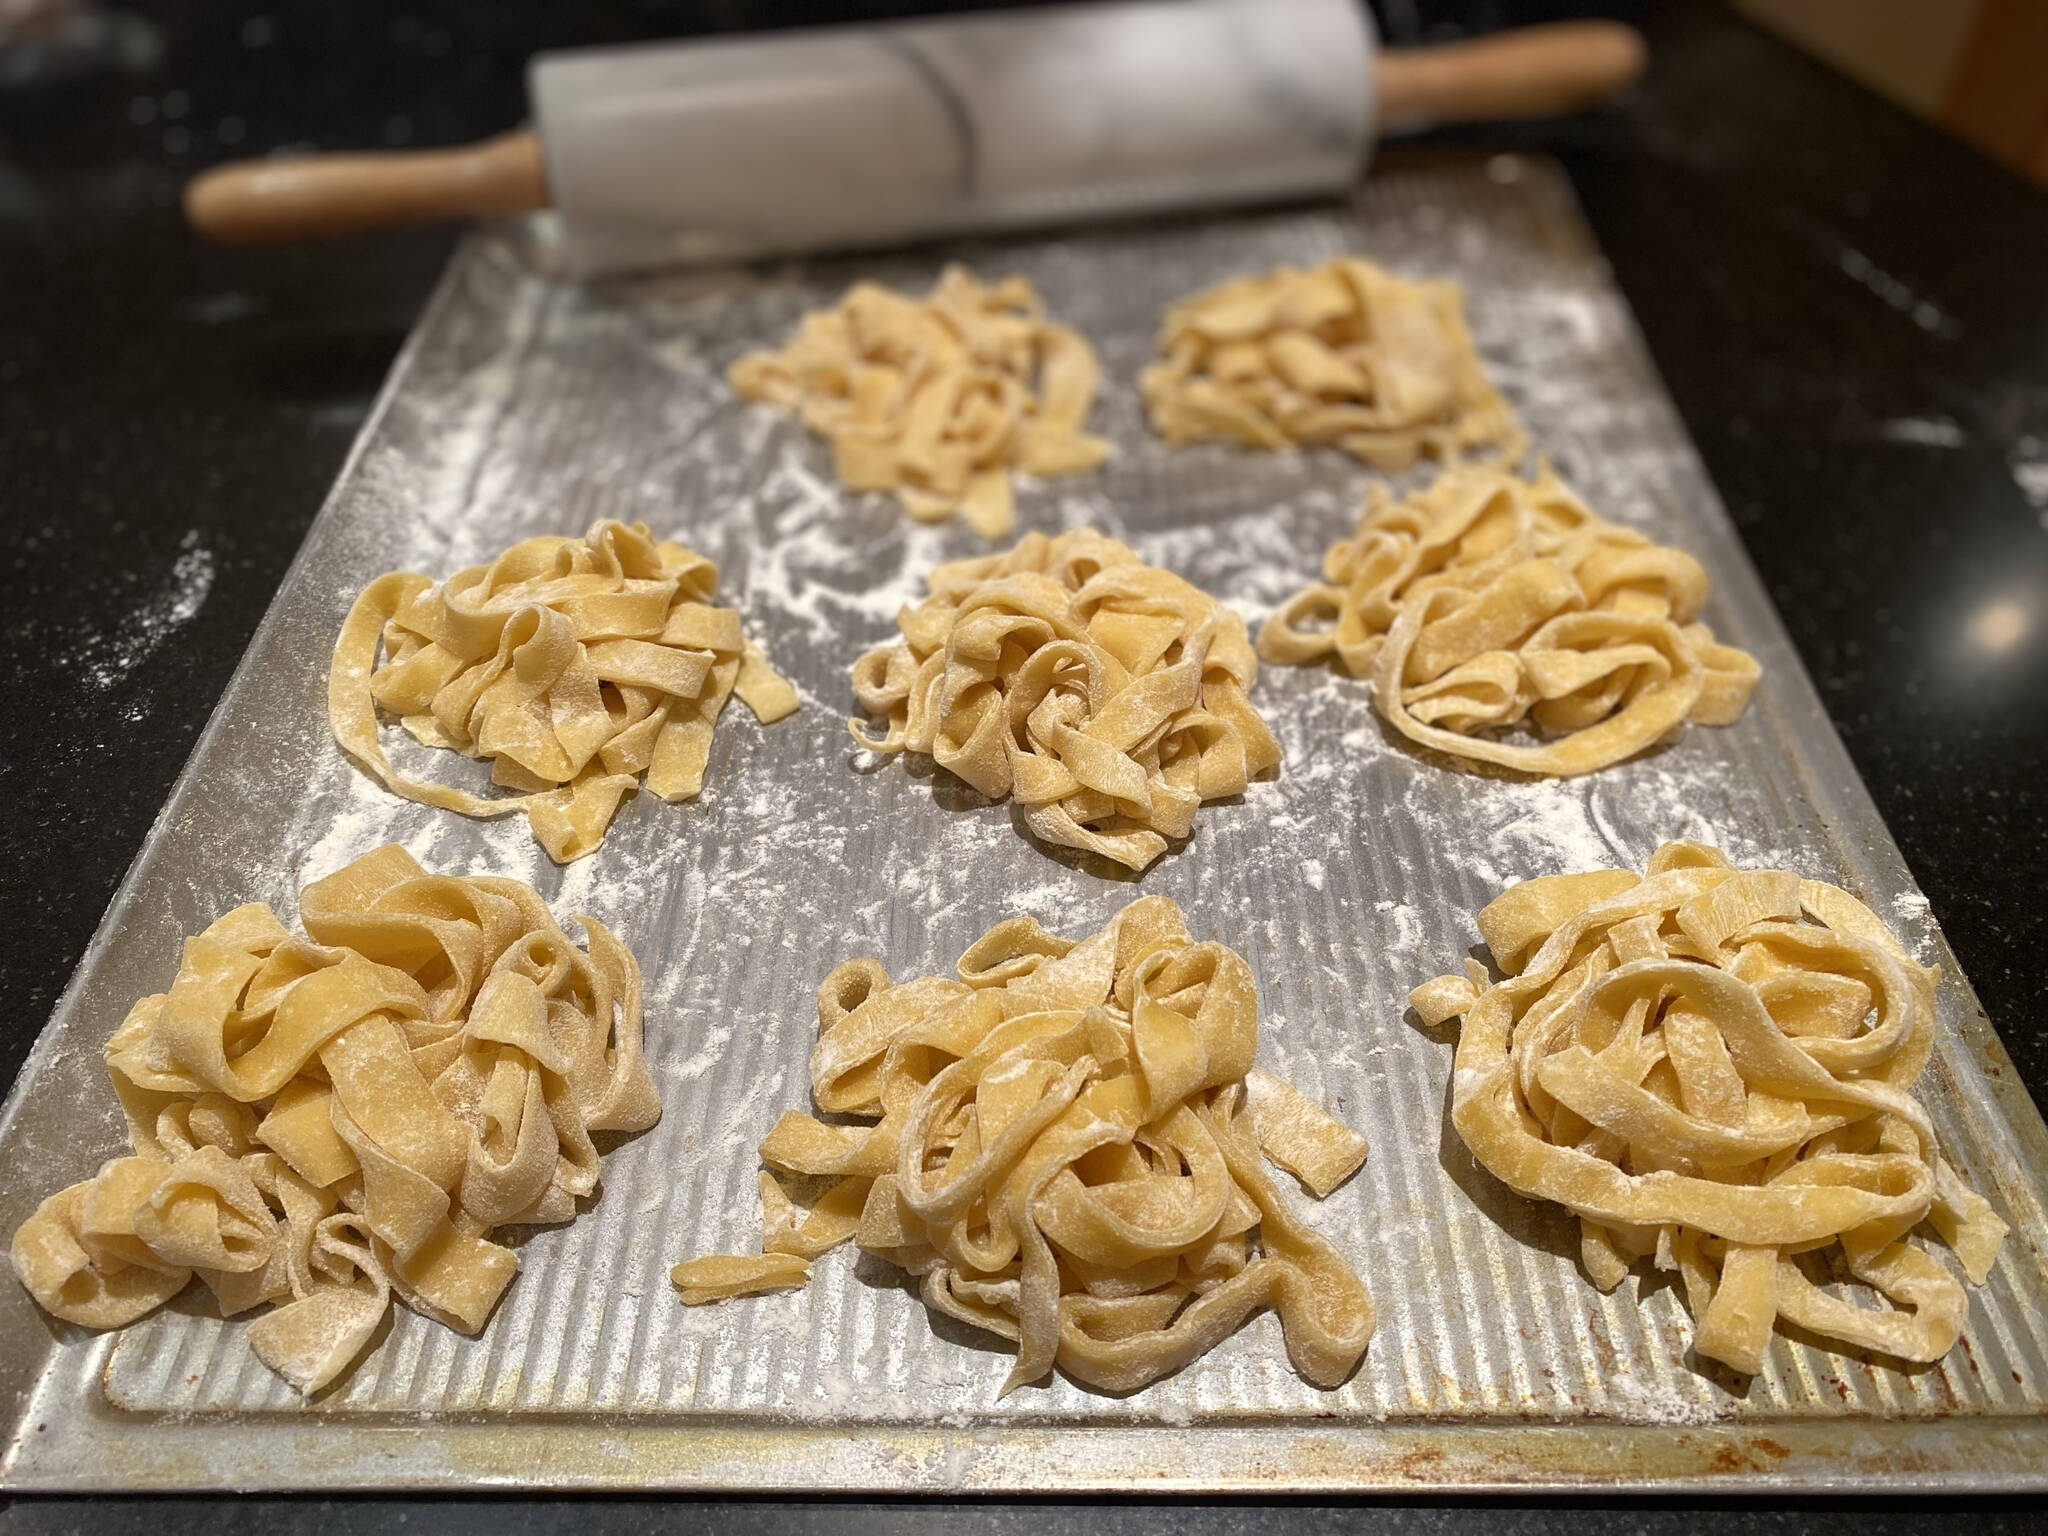 Before boiling, this handmade pasta is rolled, cut and tossed in flour to keep from sticking. (Photo by Tressa Dale/Peninsula Clarion)